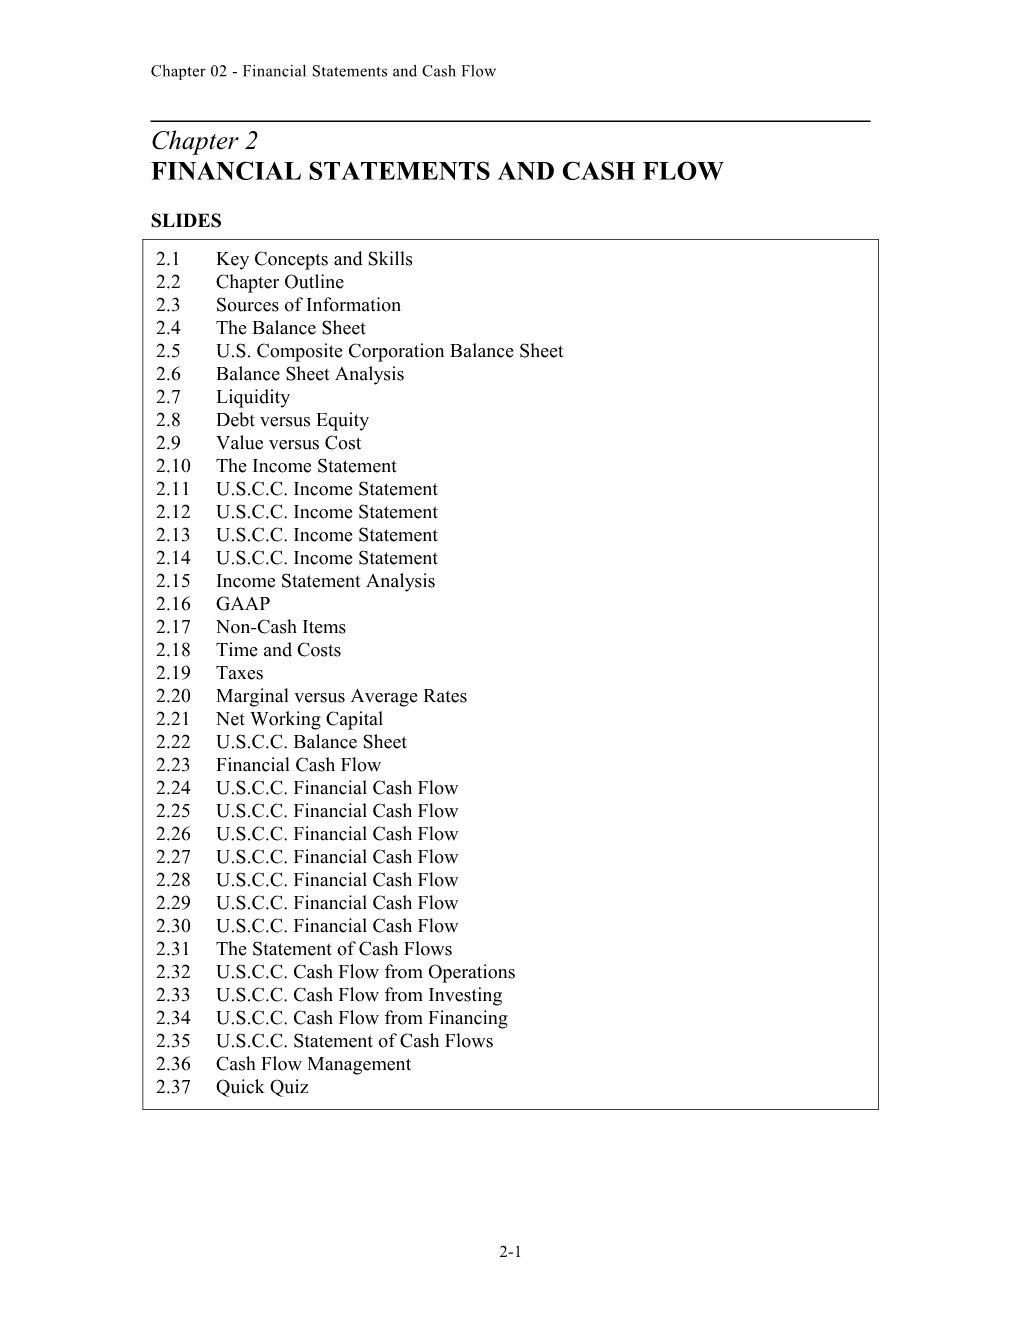 Financial Statements and Cash Flow